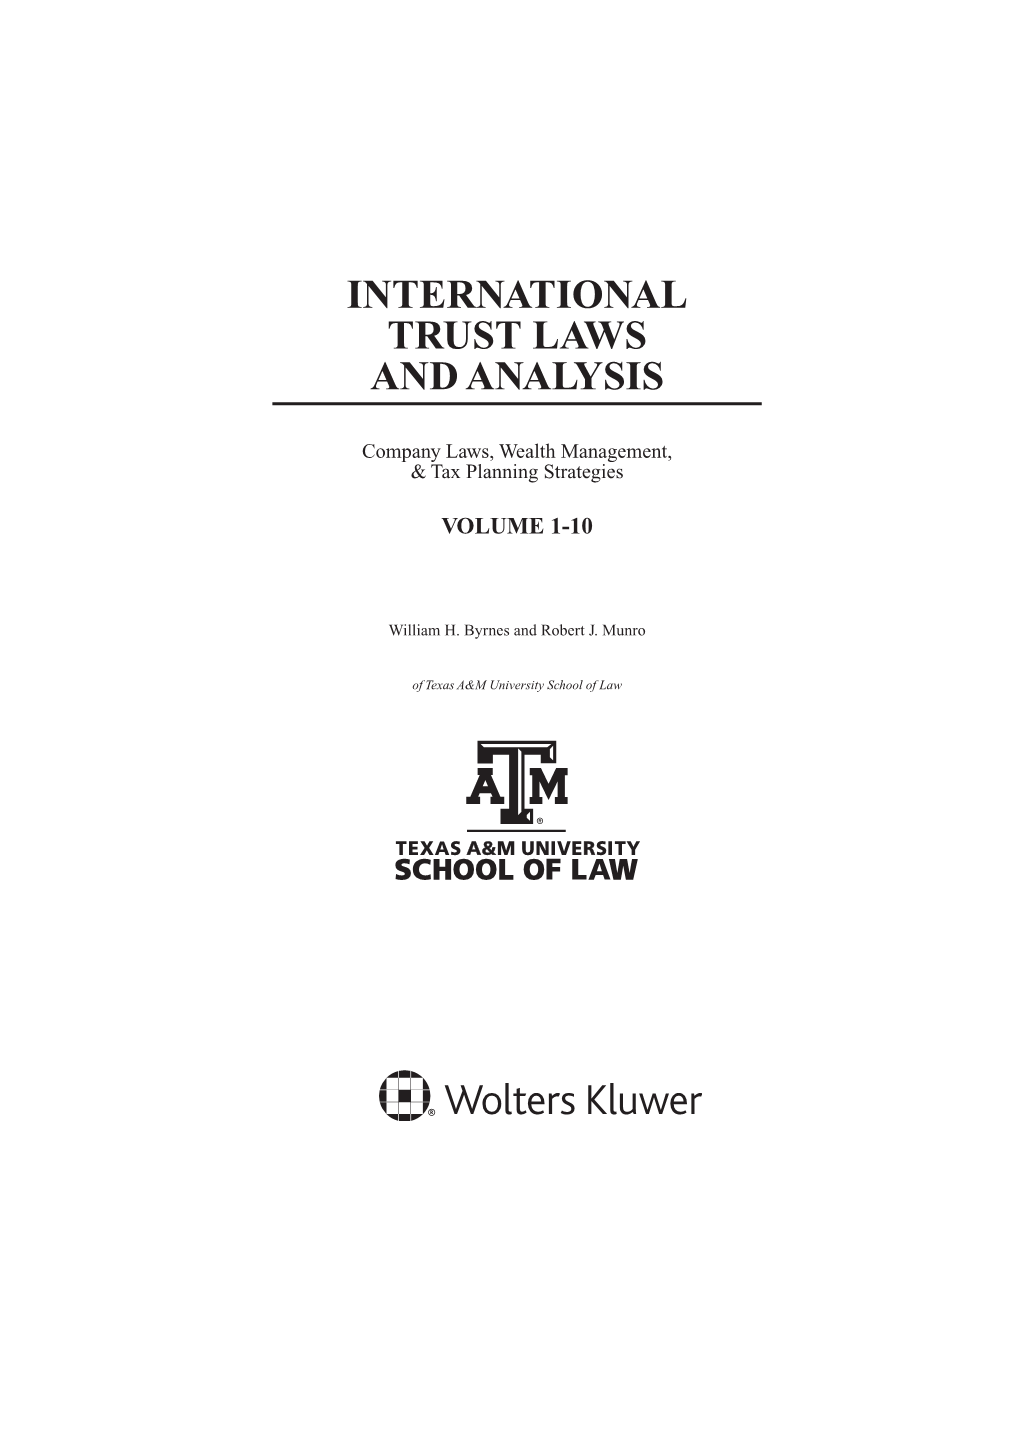 International Trust Laws and Analysis, Company Laws, Wealth Management & Tax Planning Strategies, As Well As the U.S